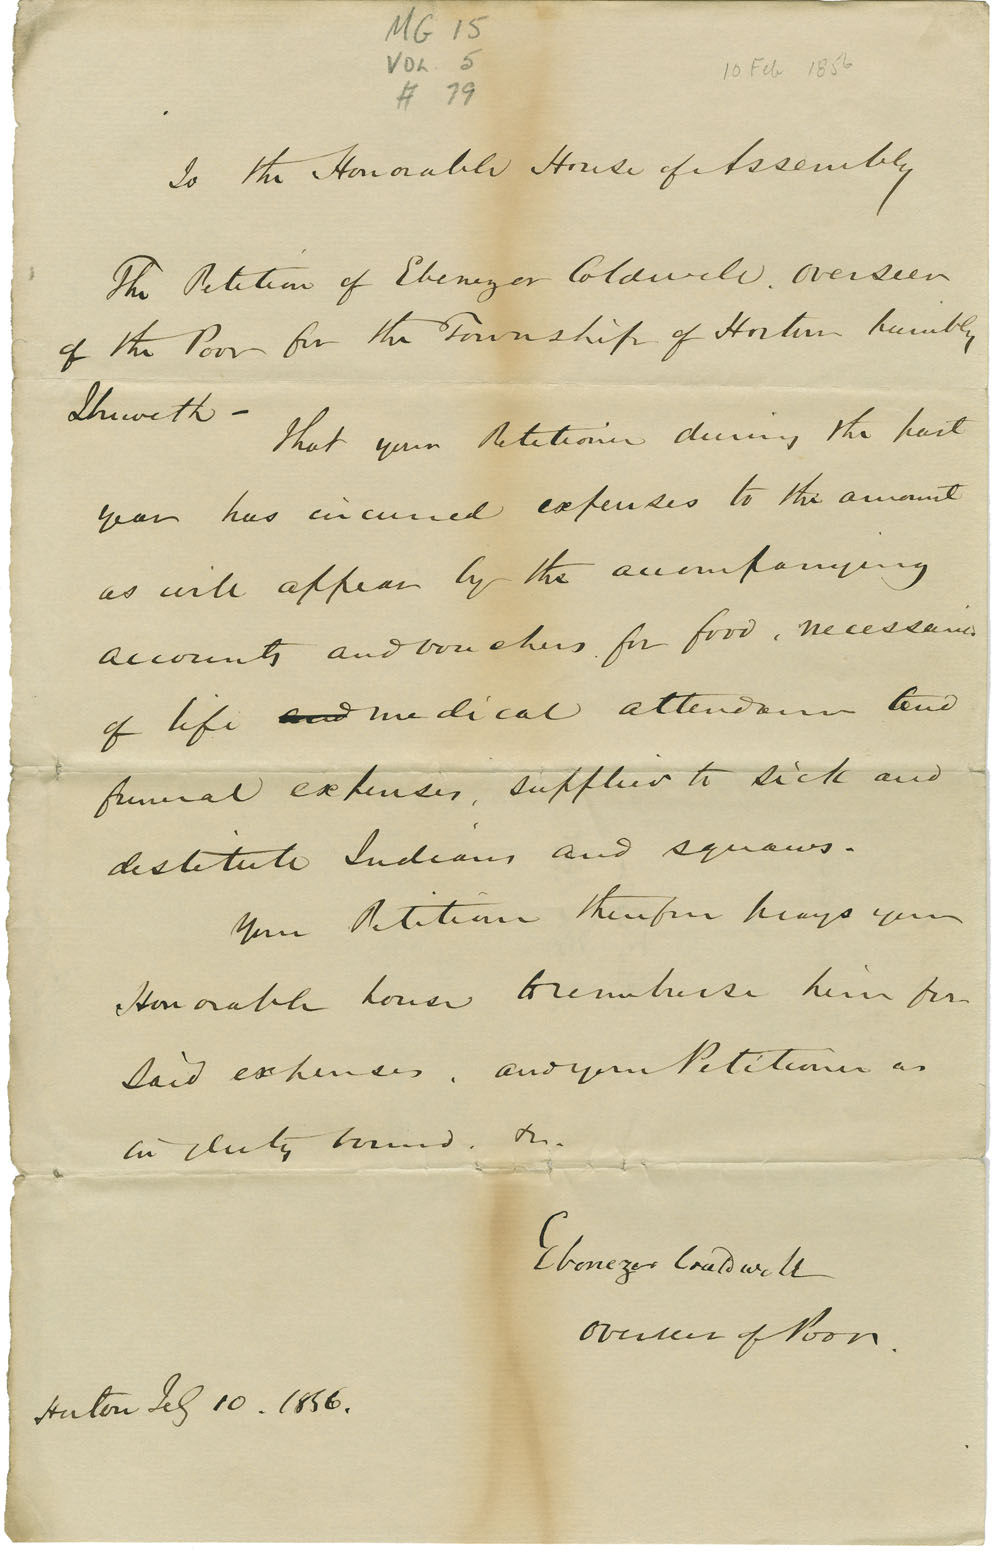 Petition of Ebenezer Coldwell, Overseer of the Poor for the township of Horton, requesting payment of expenses incurred in the past year.